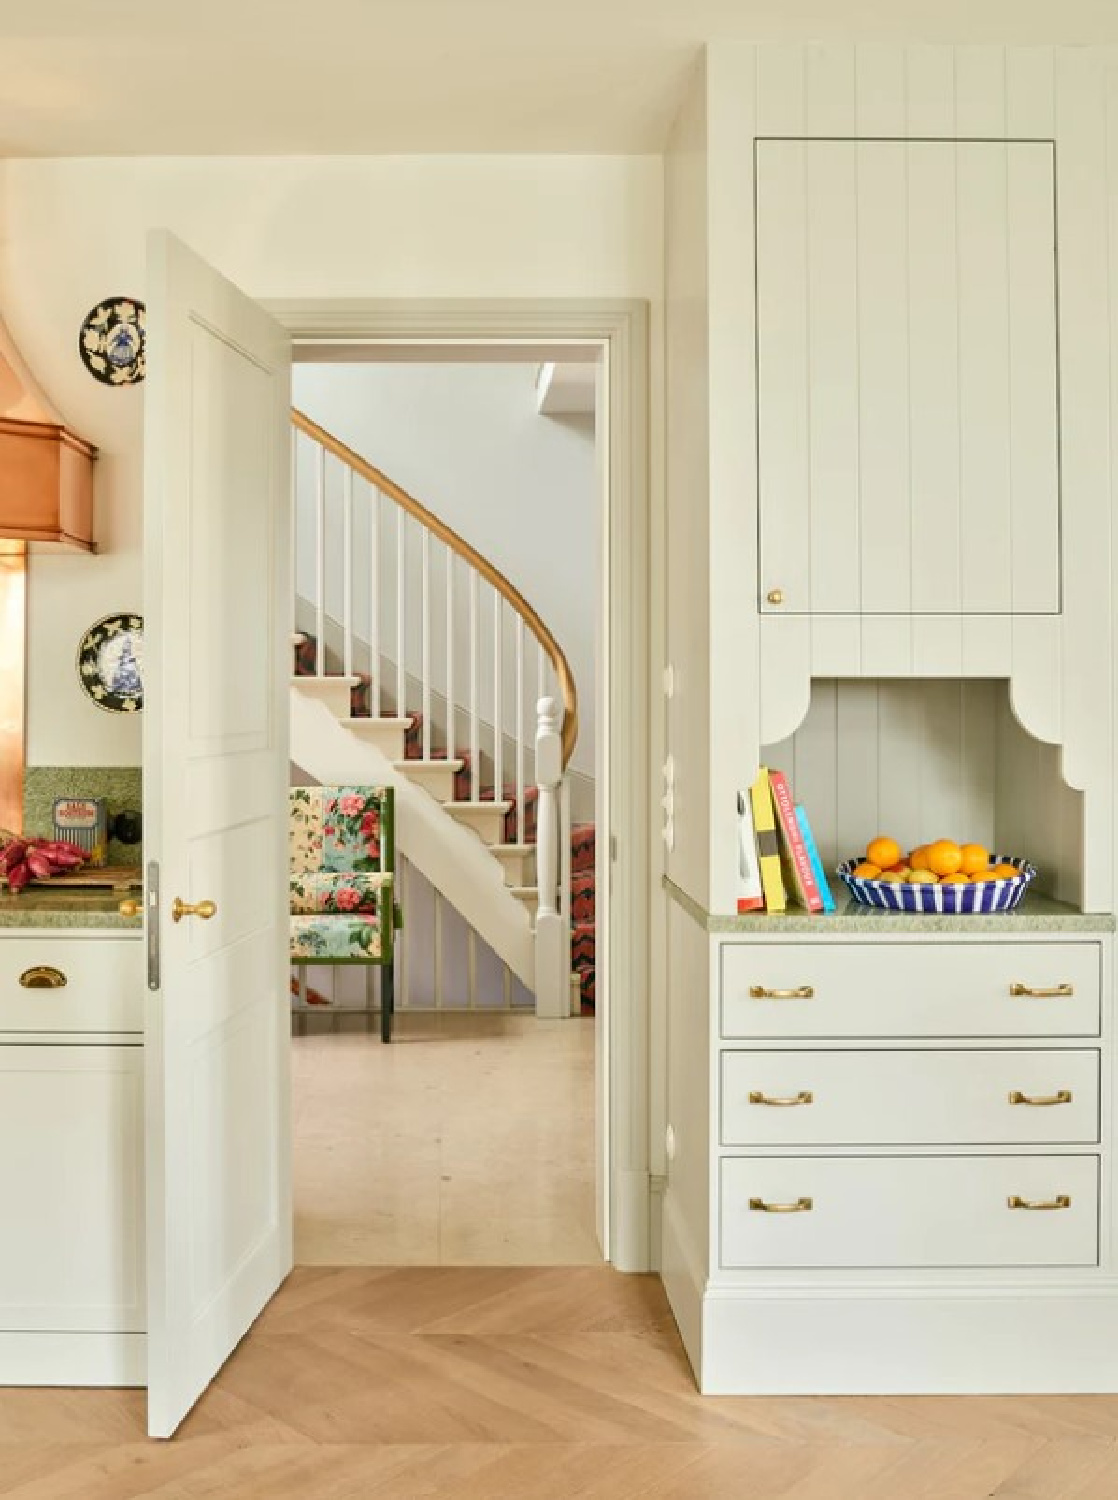 Lovely custom cabinetry with detail - Beata Heuman; photo: Robert Reiger.